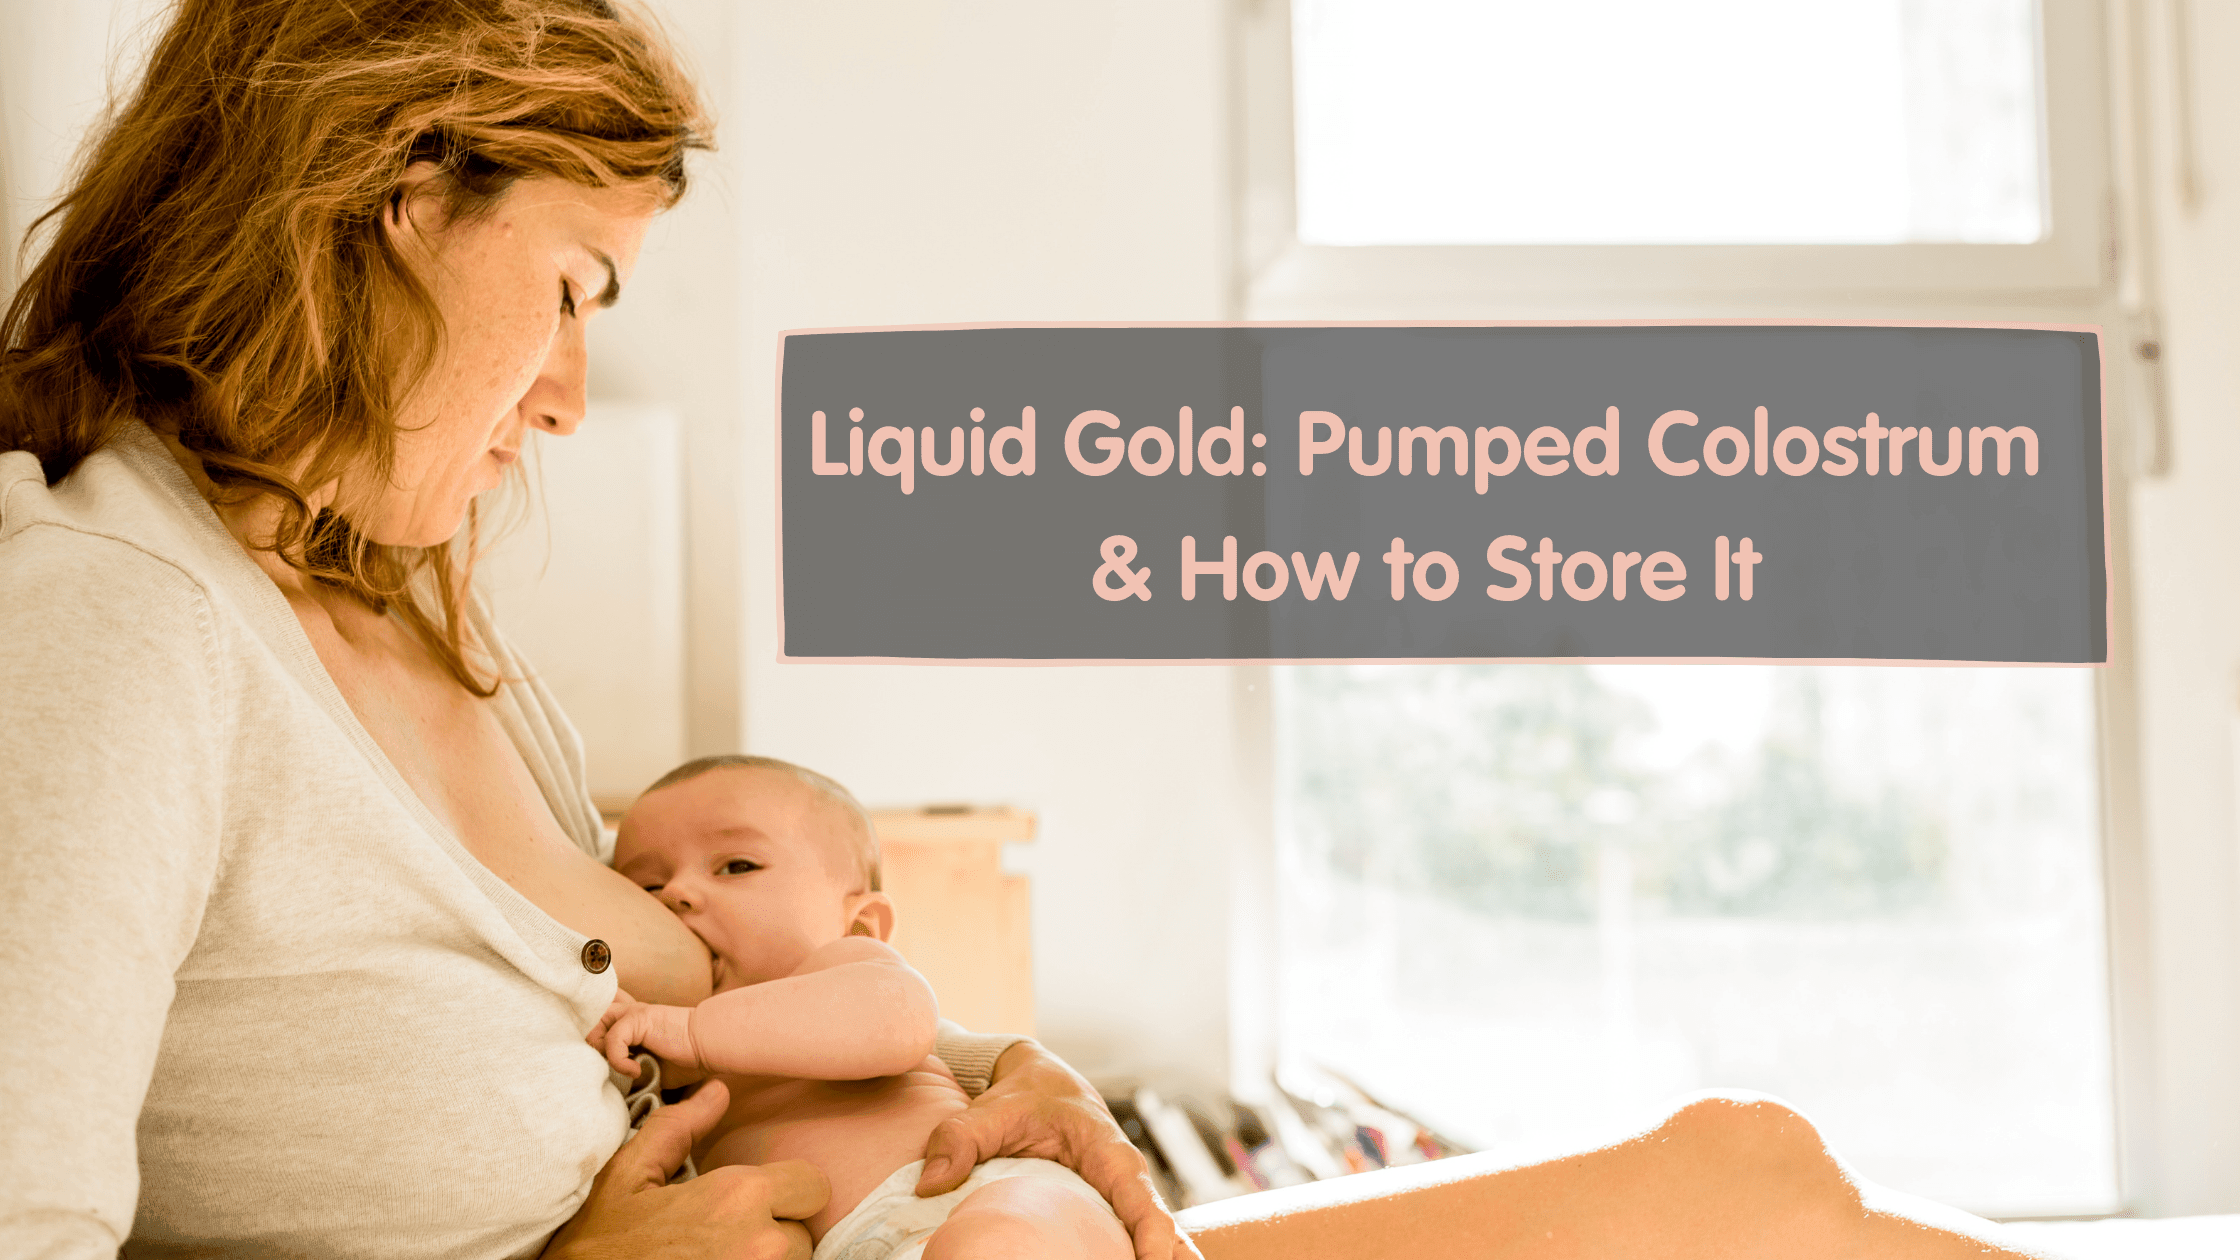 Liquid Gold: Pumped Colostrum and How to Store It